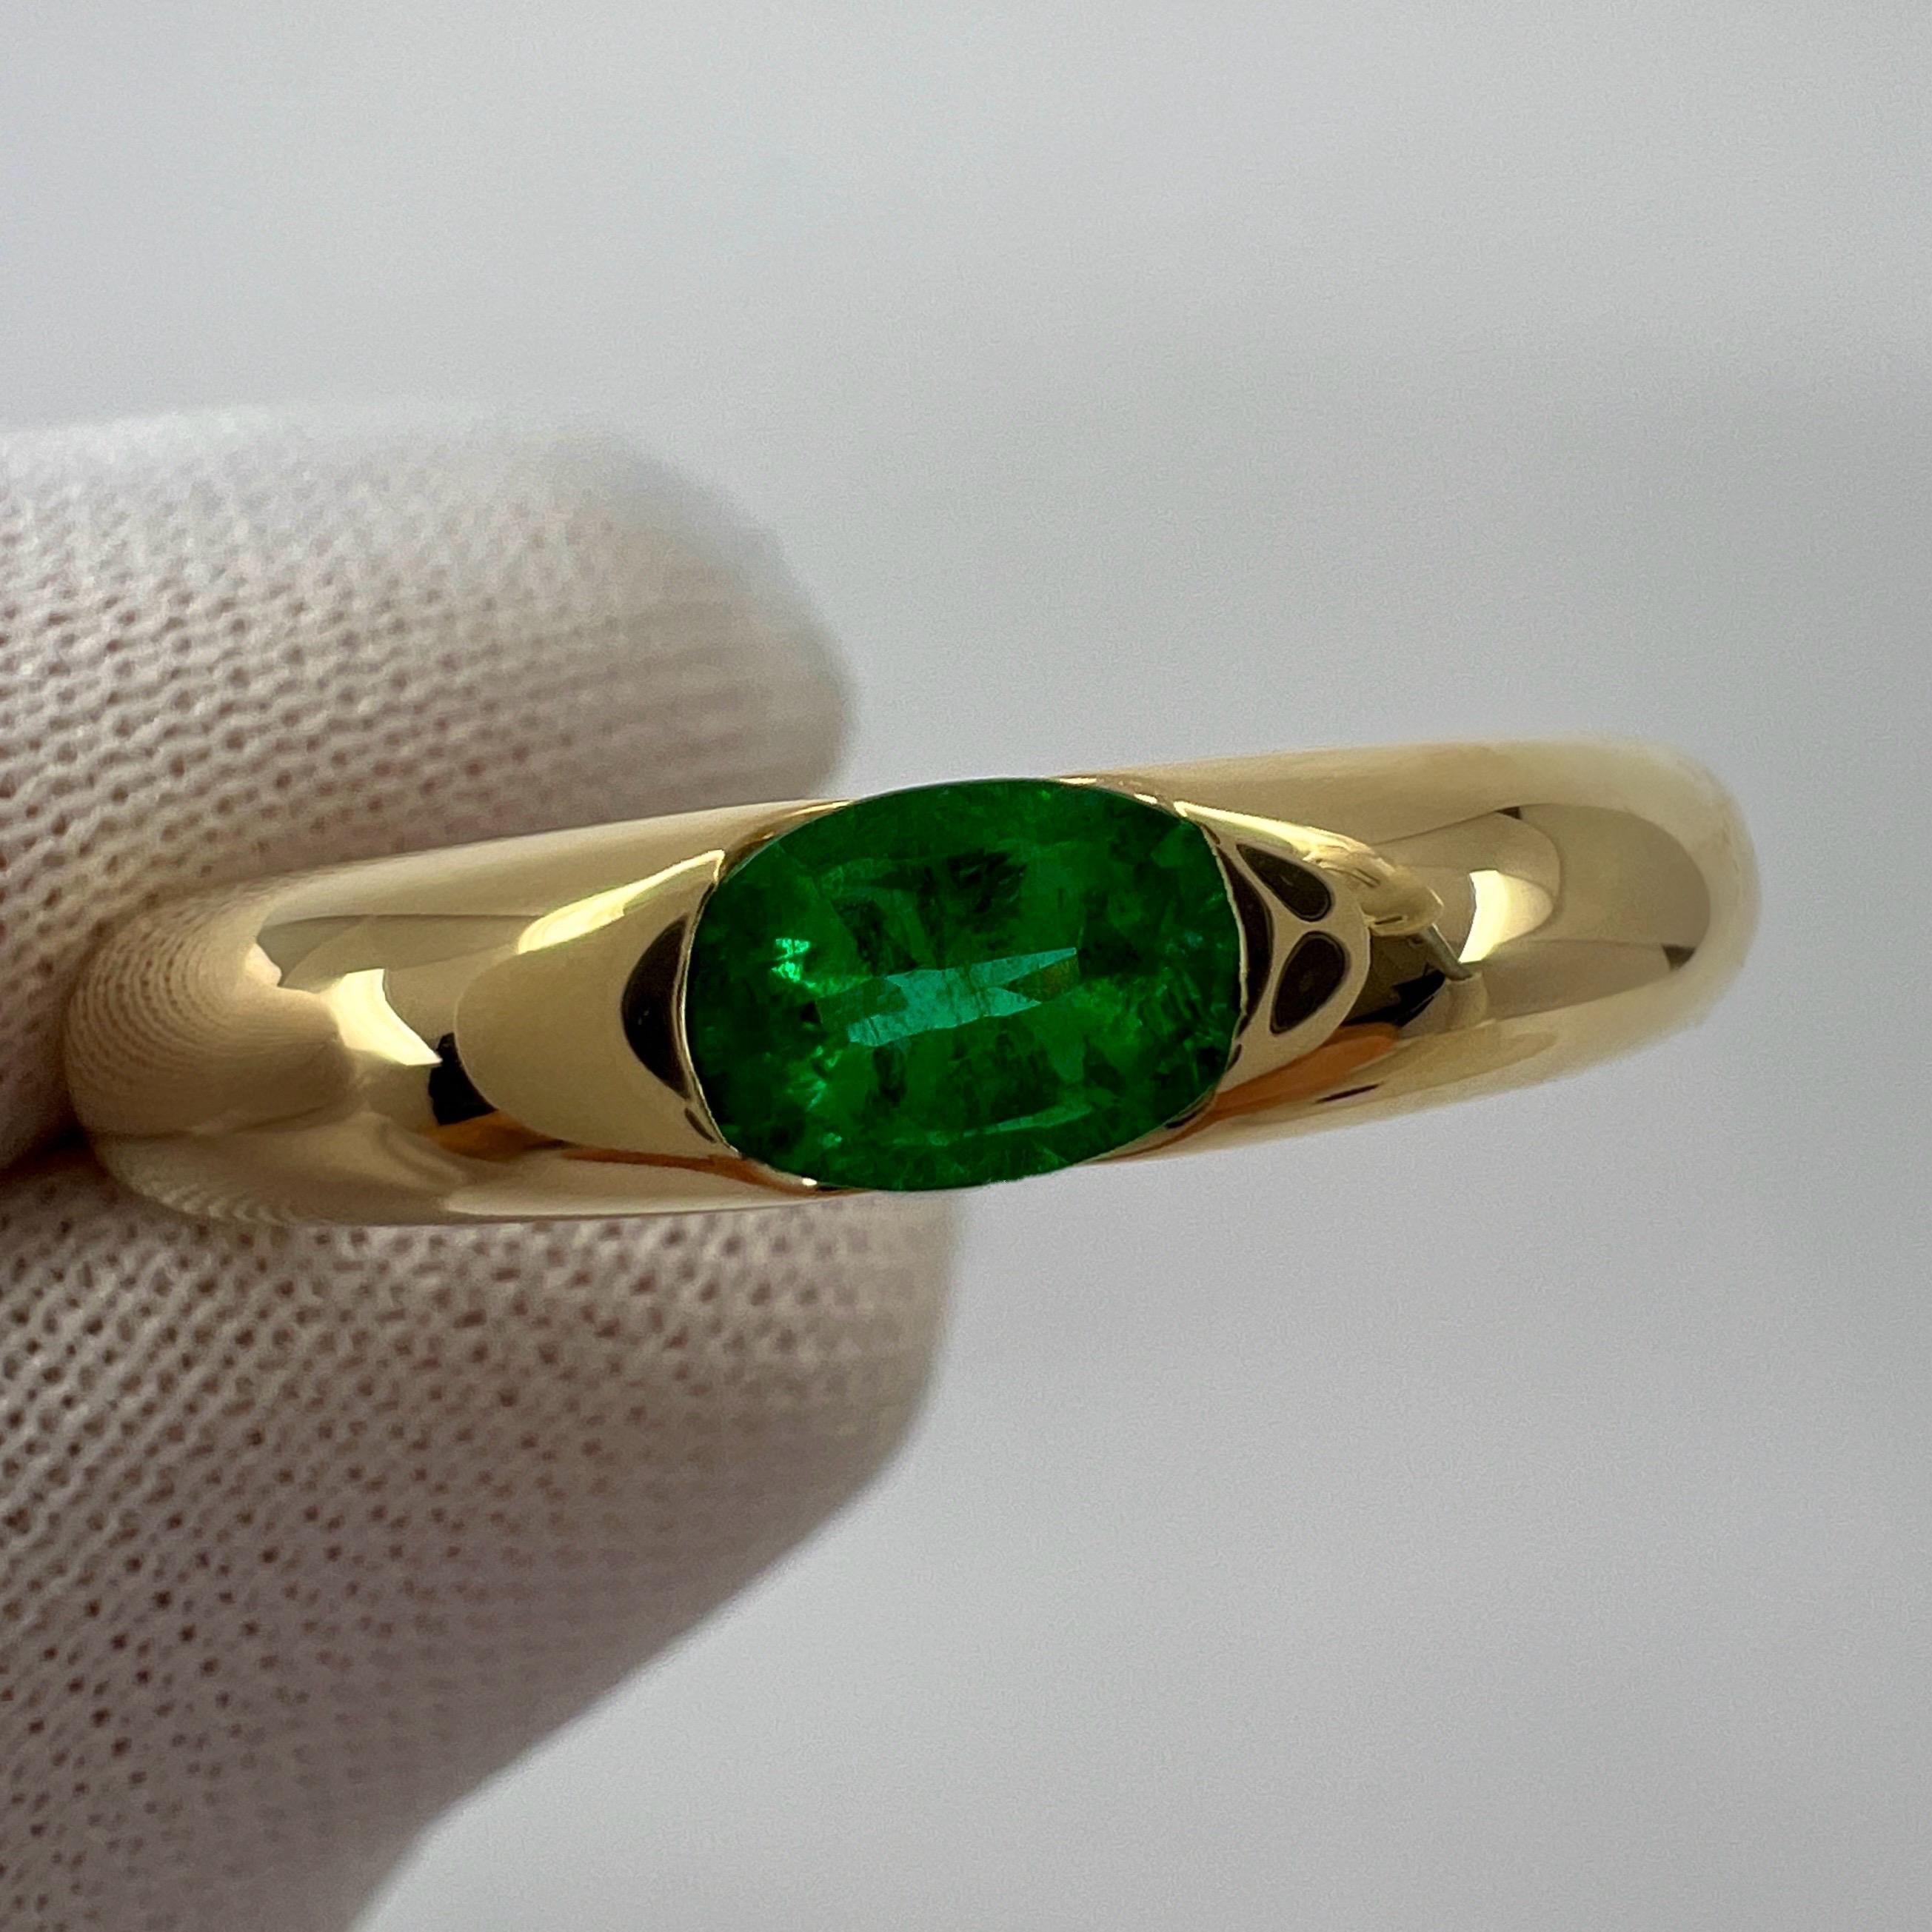 Vintage Cartier Emerald Vivid Green Ellipse 18k Yellow Gold Solitaire Ring 51  6